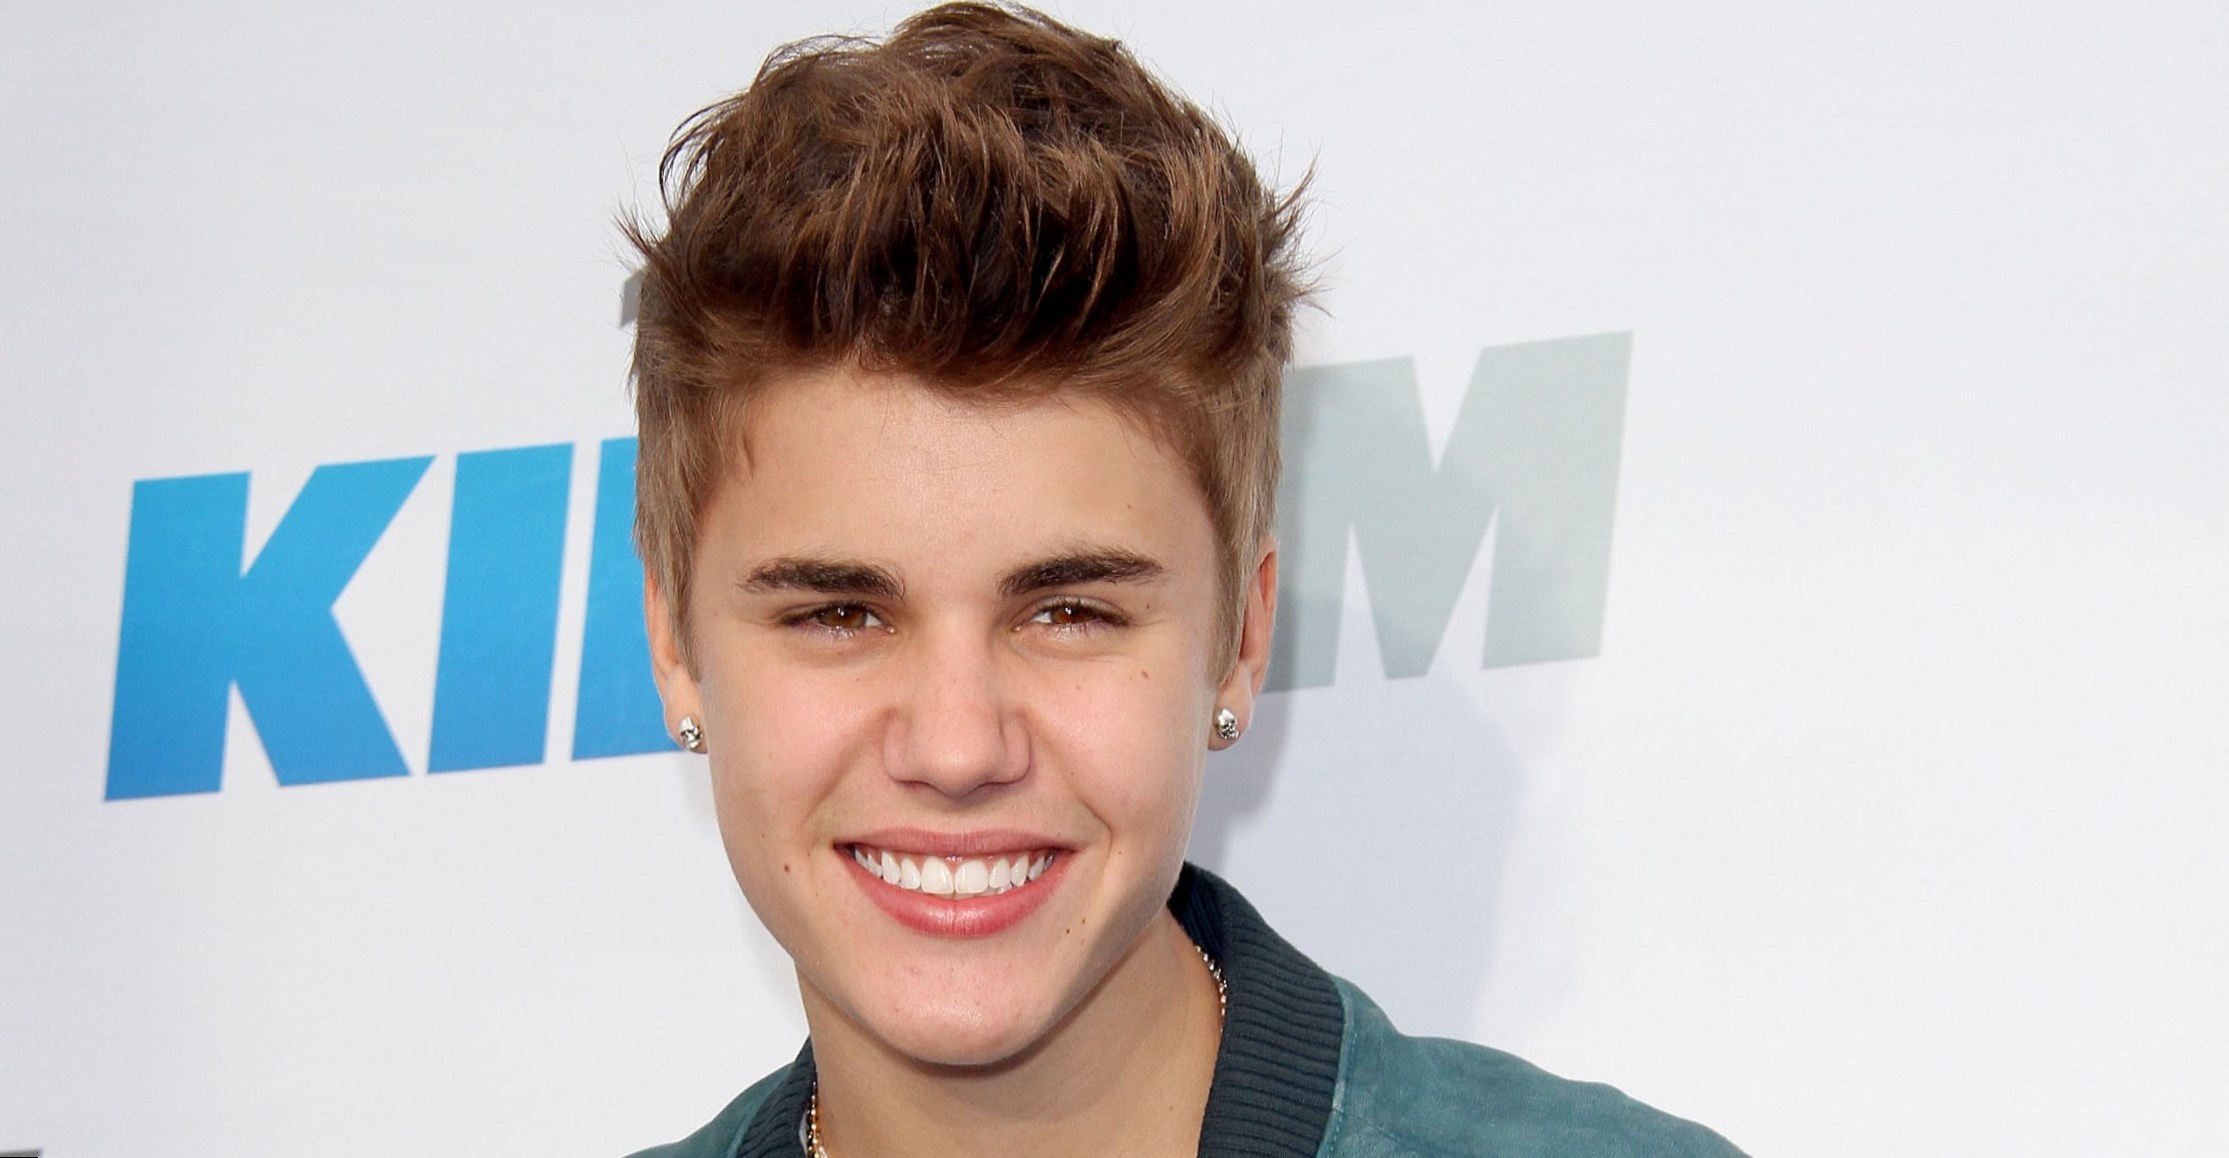 Justin Bieber celebrity hair changes. Really?2229 x 1158